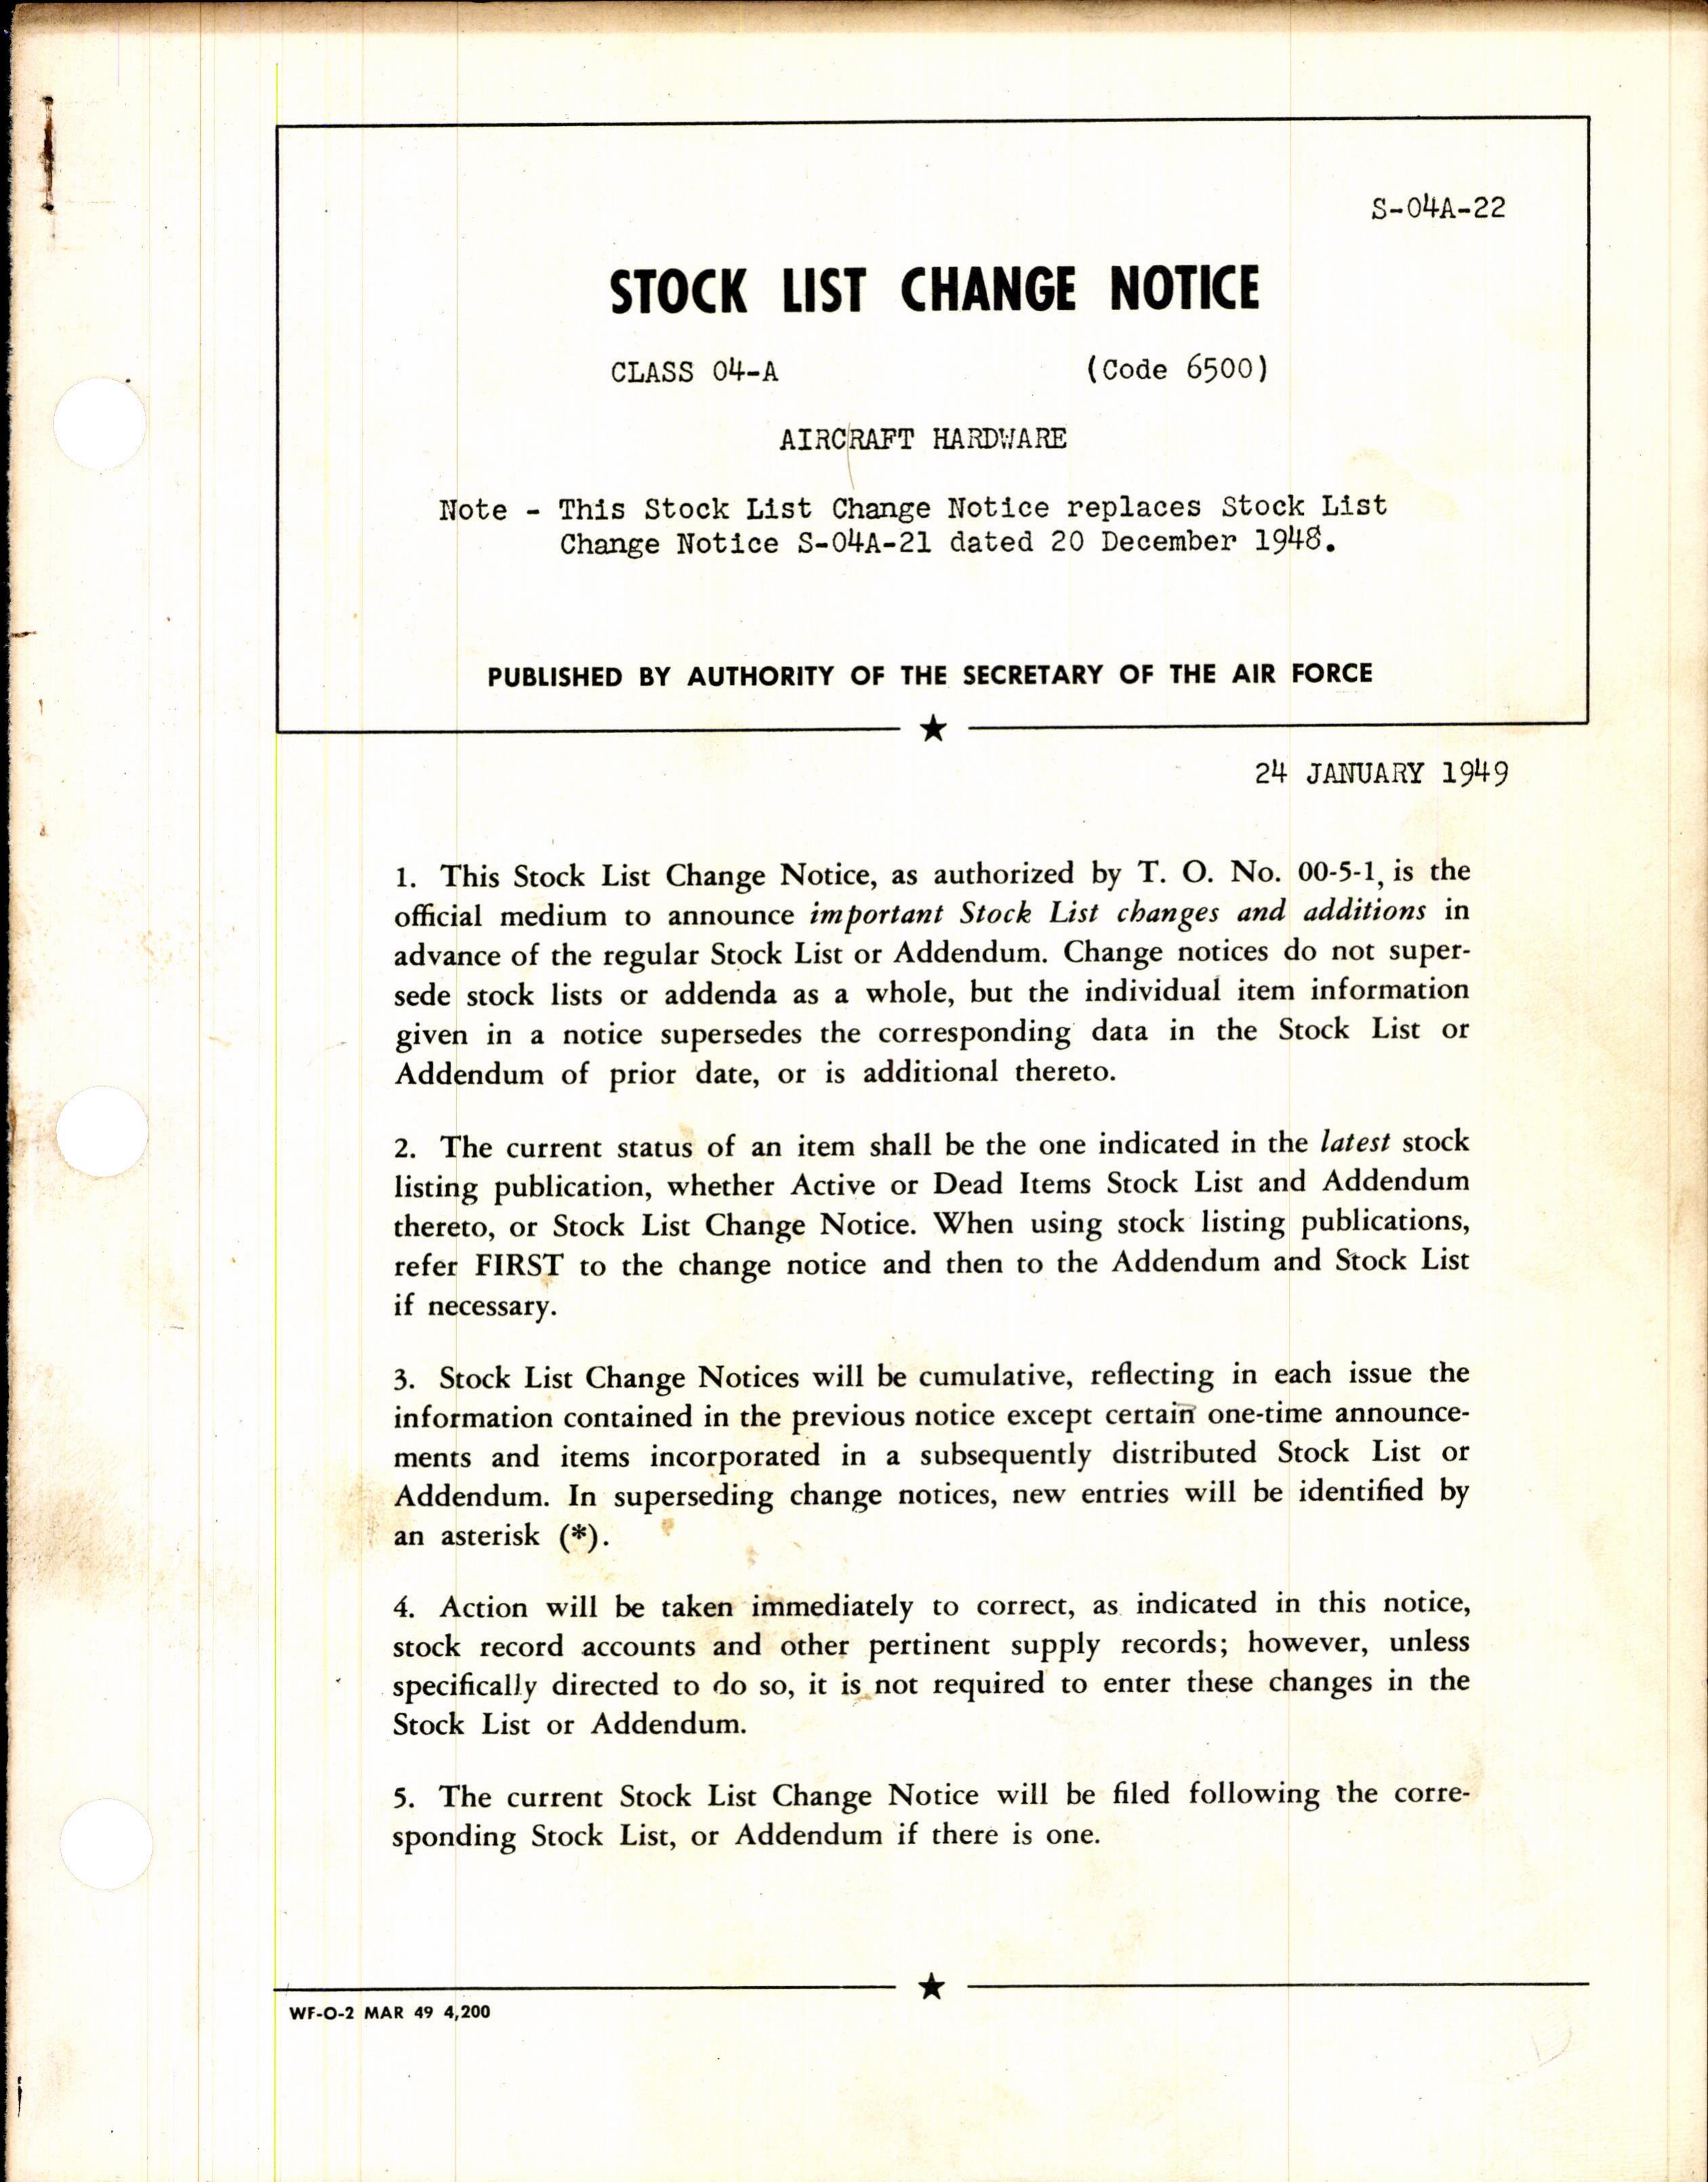 Sample page 1 from AirCorps Library document: Stock List Change Notice - Aircraft Hardware